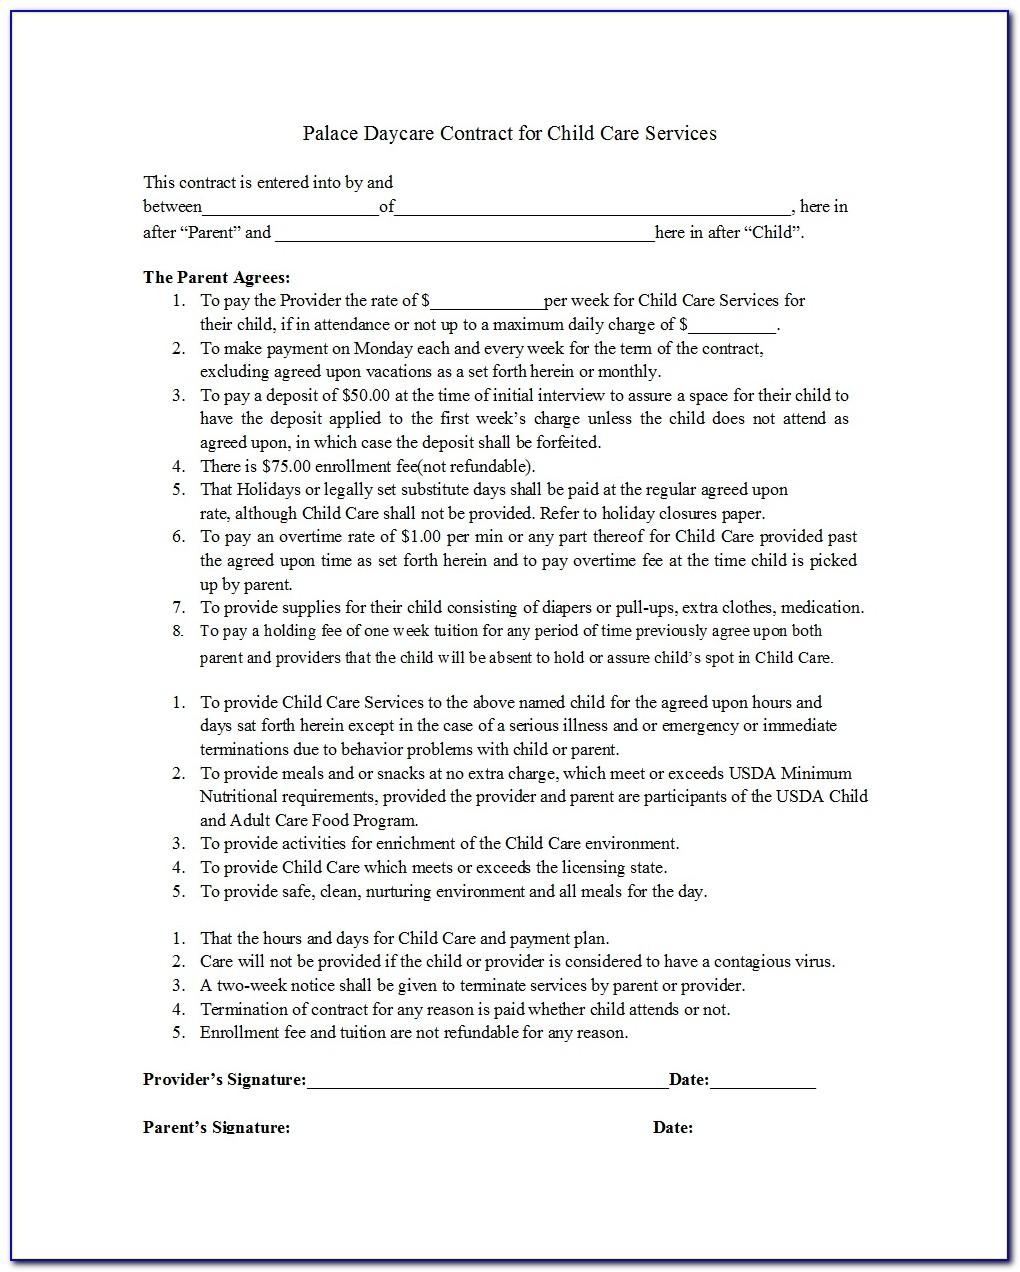 Child Care Contract Format